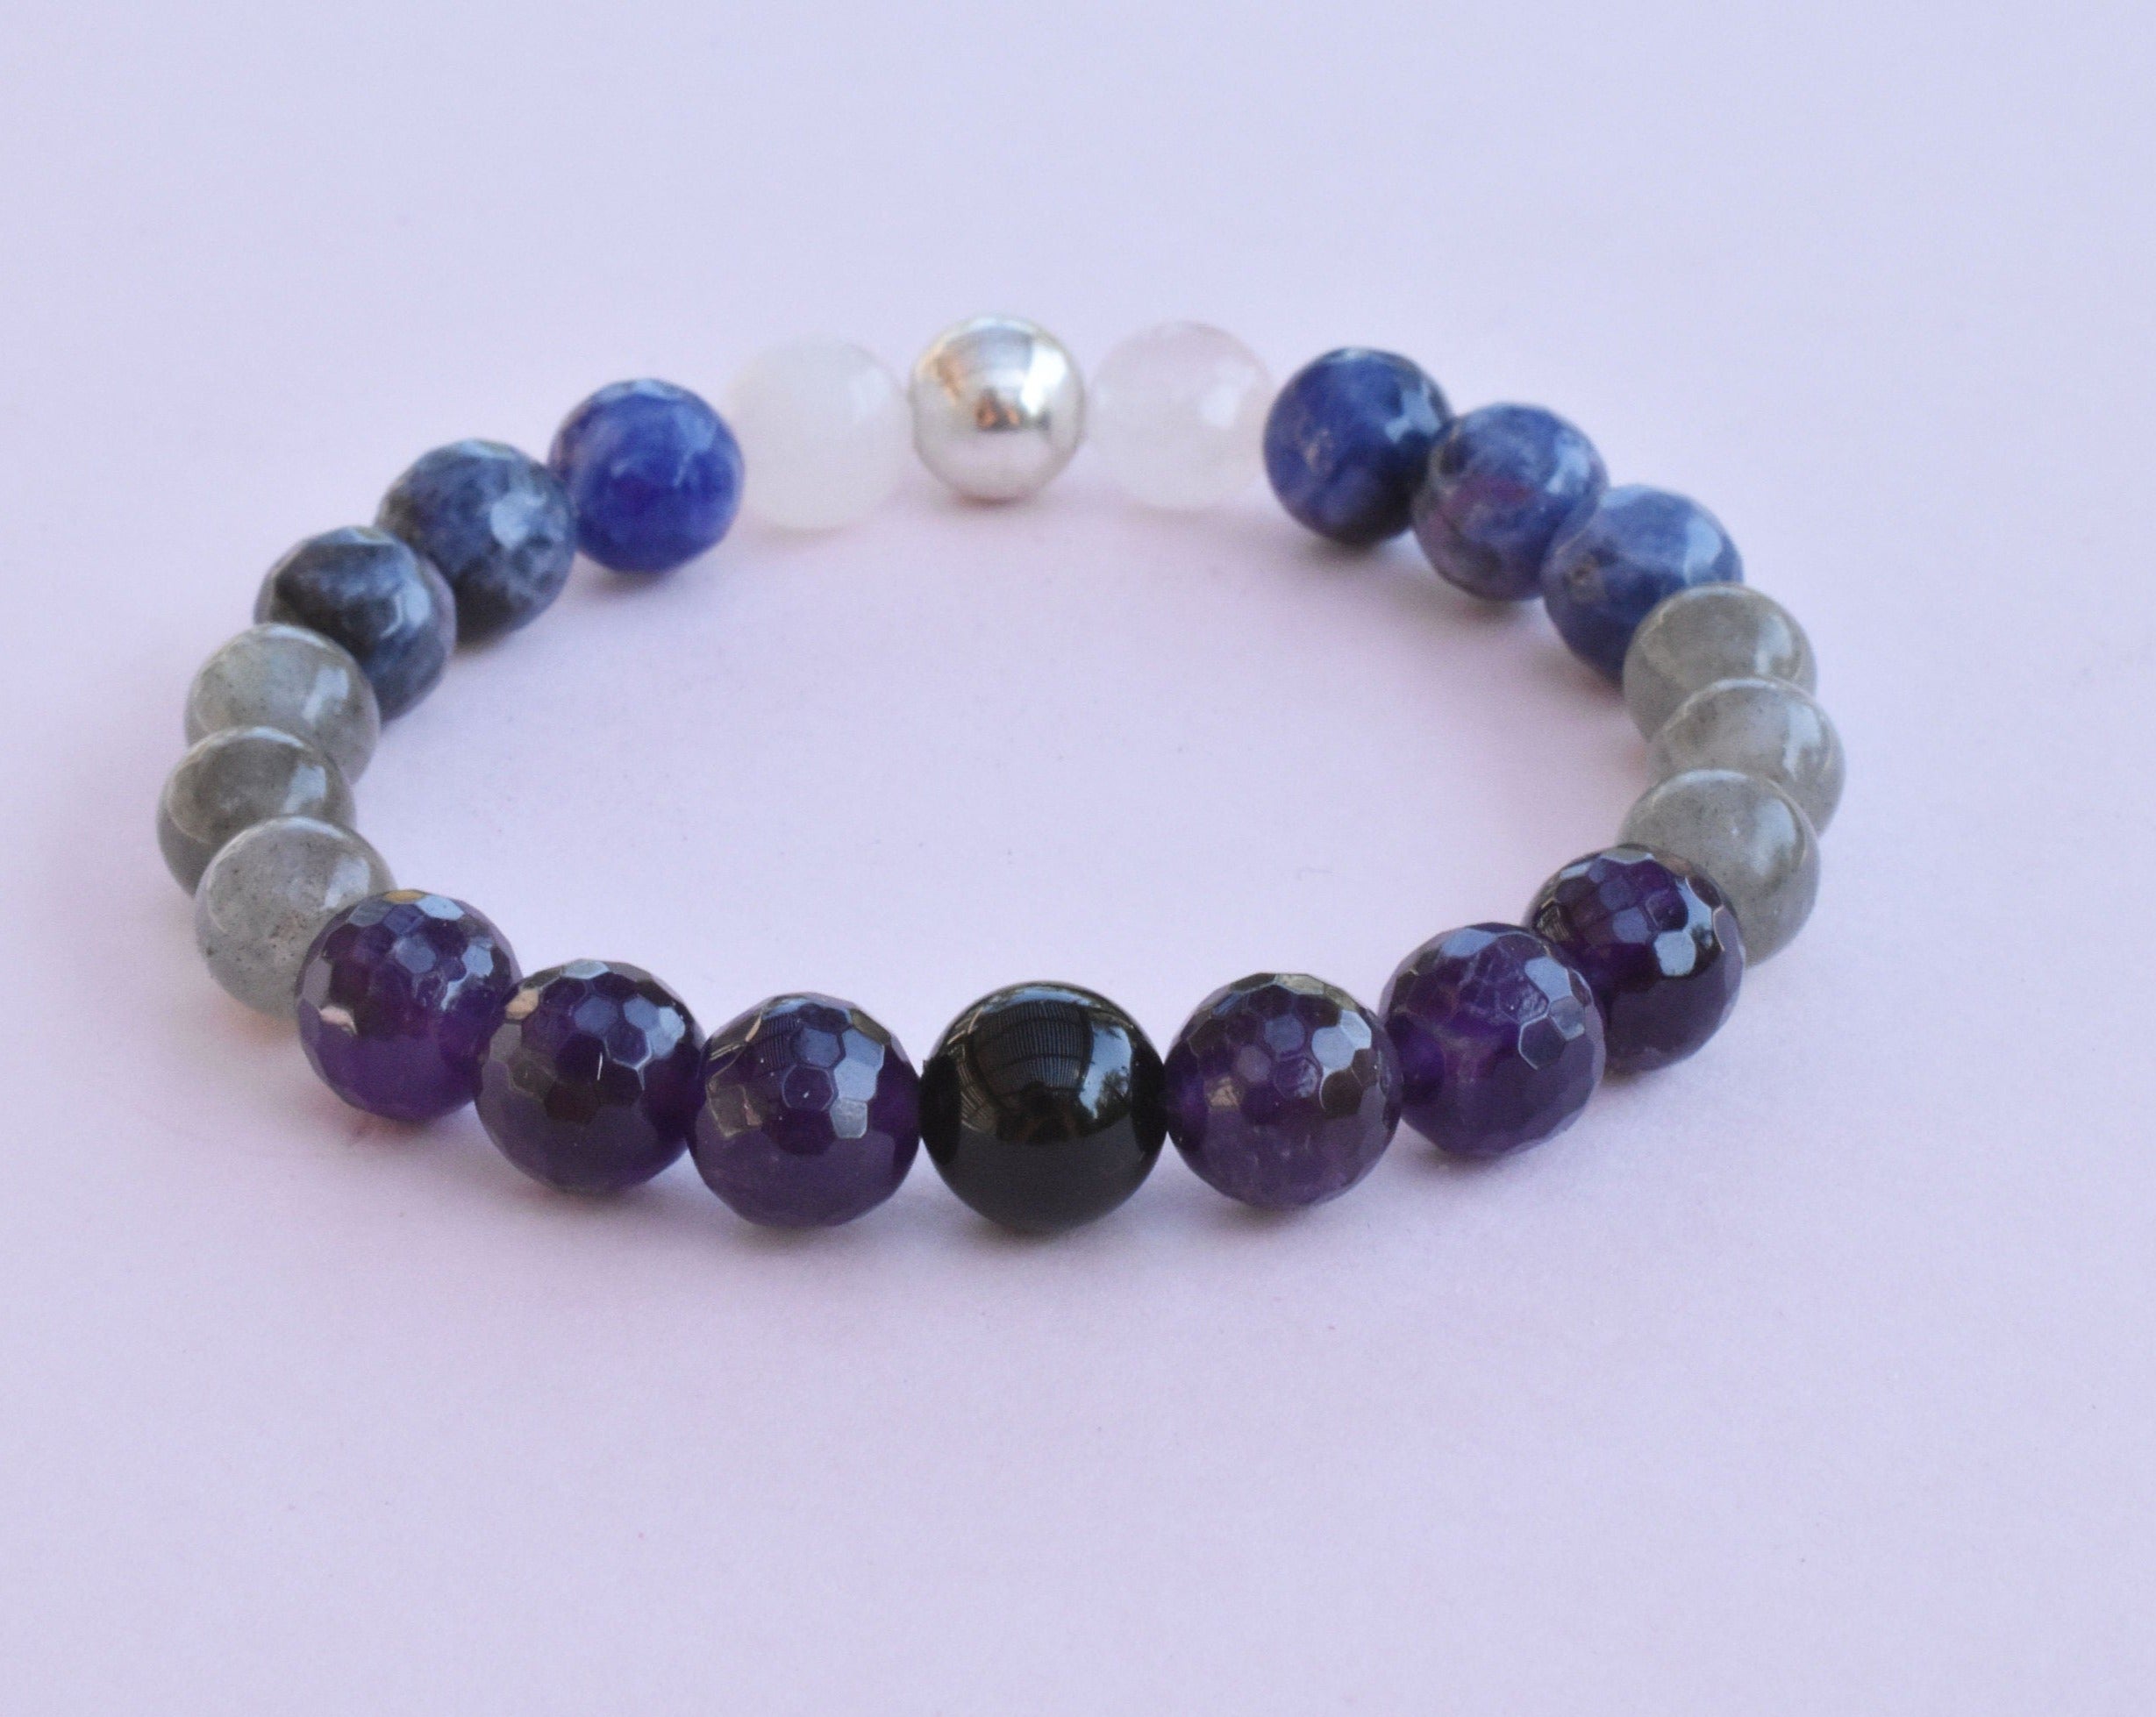 Healing power bracelet to activate your inner psychic abilities. Healing gemstone bracelet features moonstone, labradorite, sodalite, amethyst, and black obsidian. 